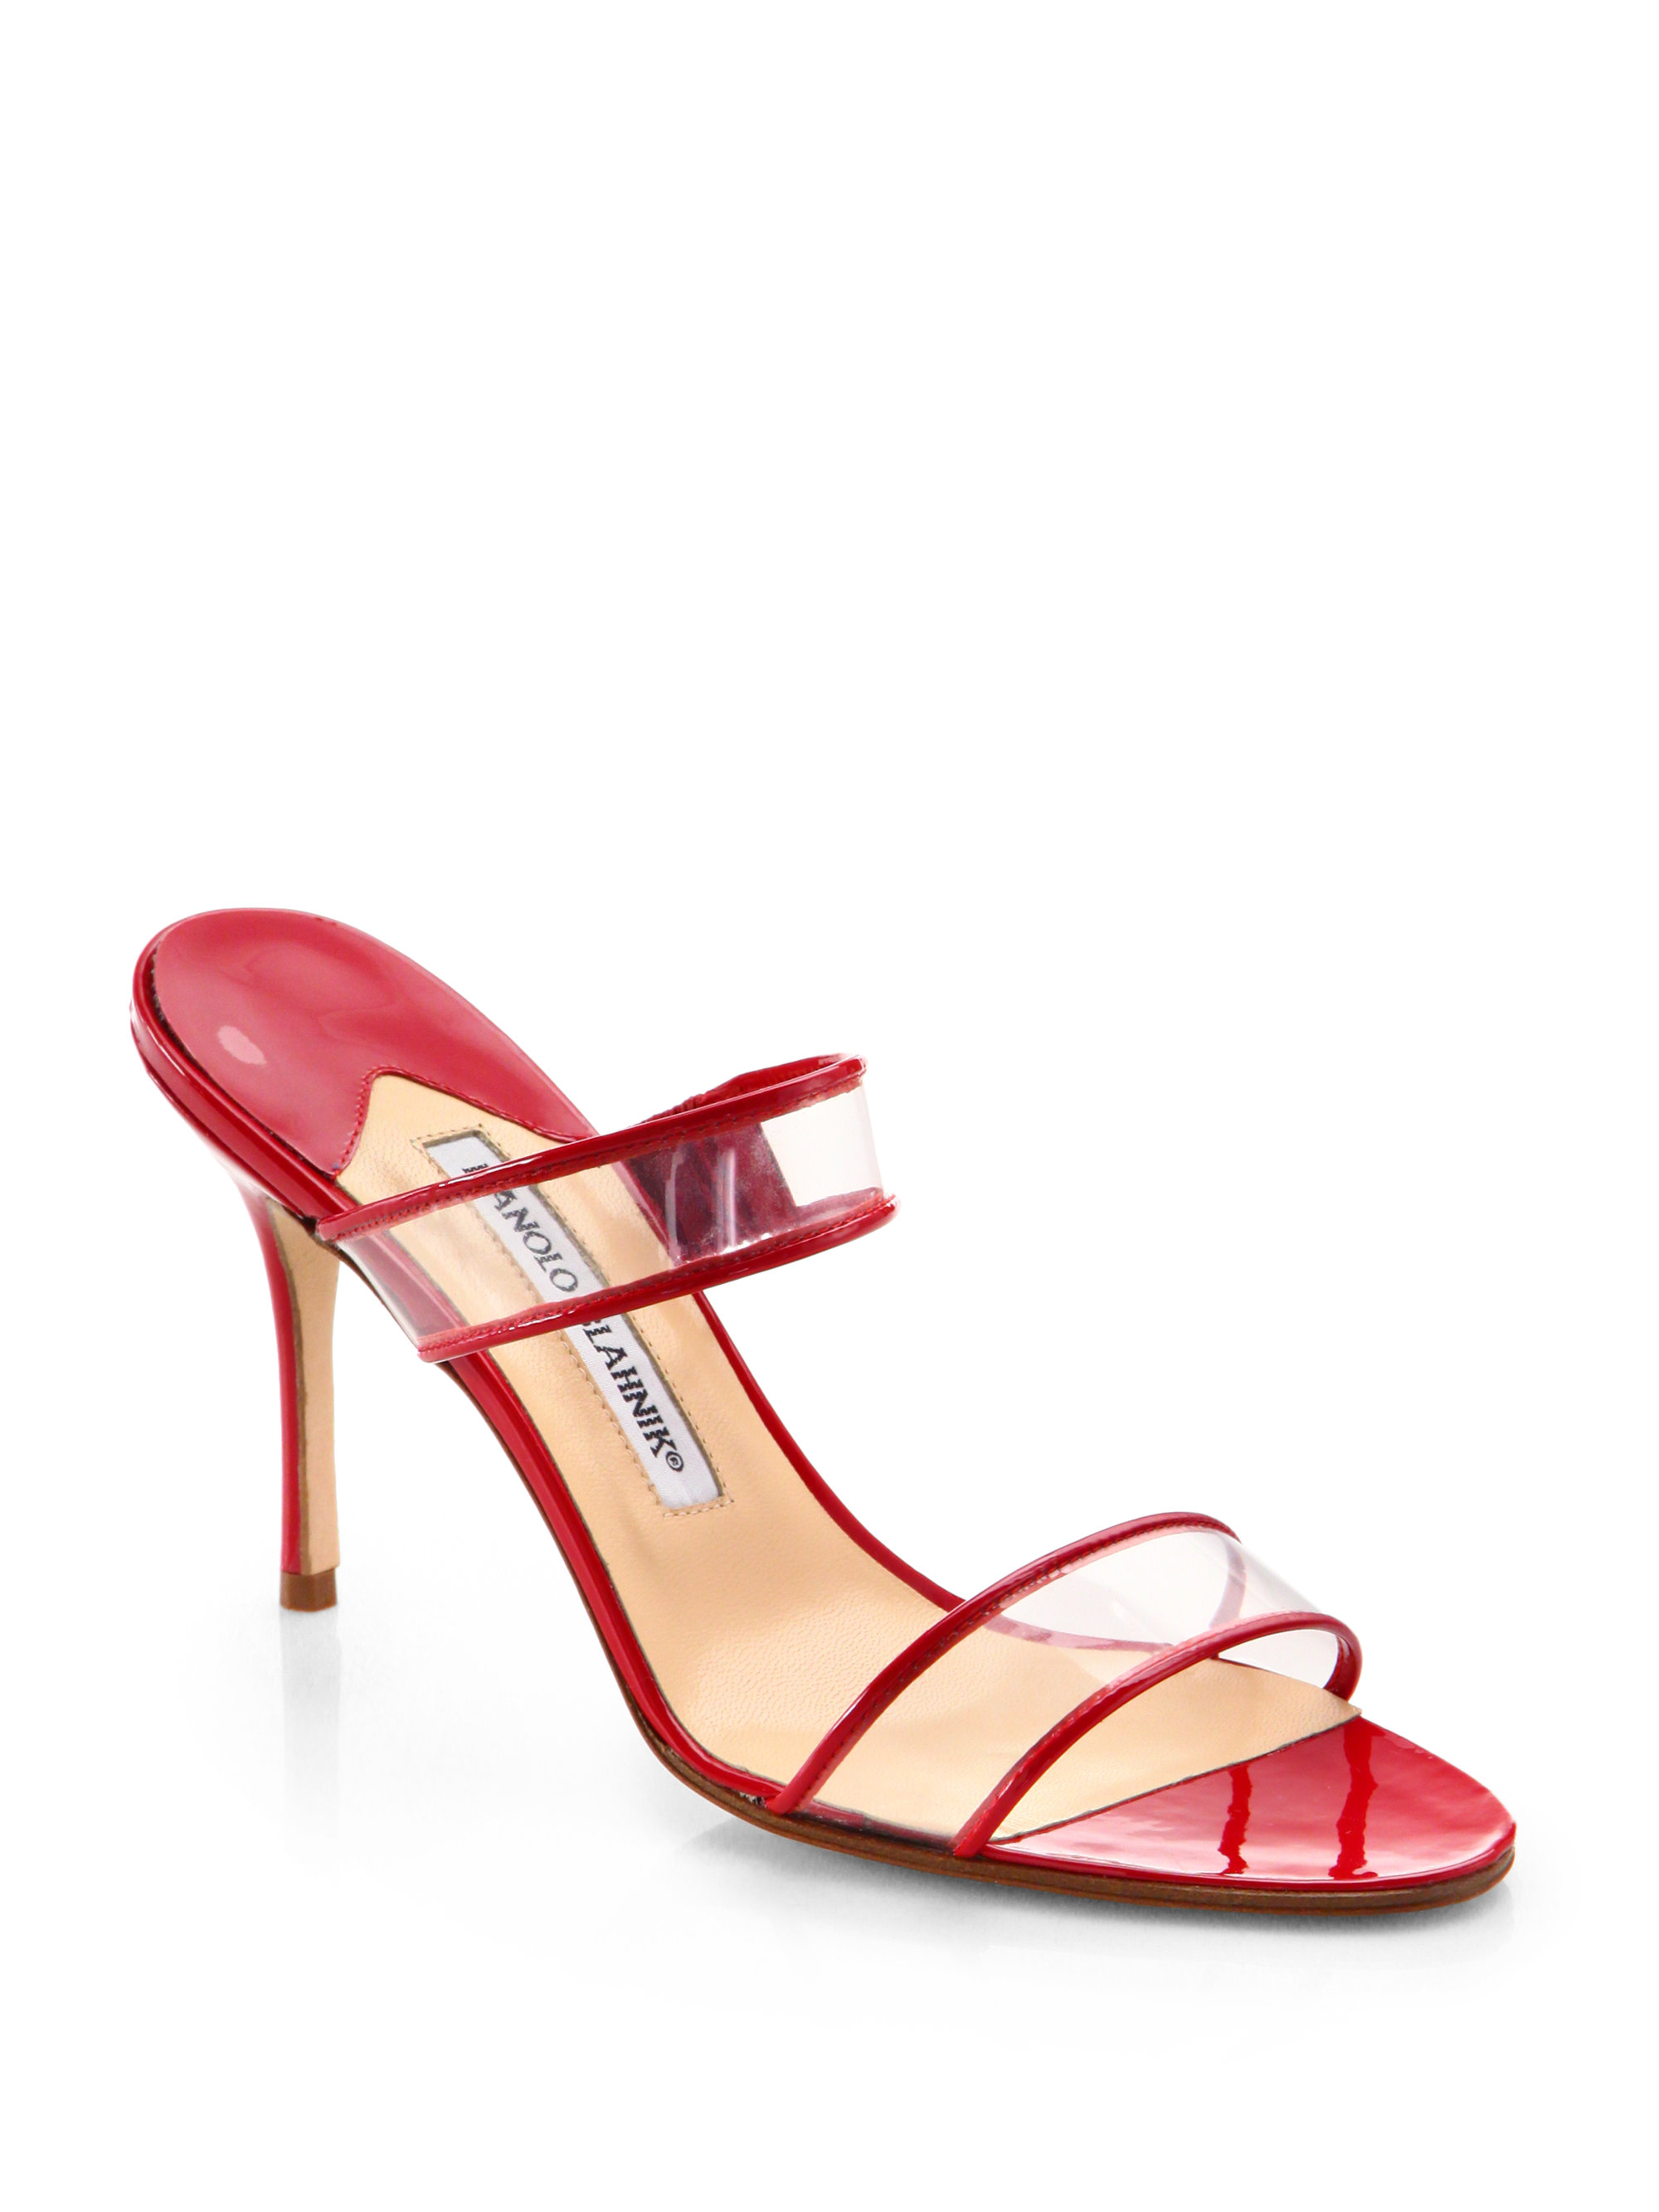 Manolo Blahnik Muluca Translucent Double banded Sandals in Red | Lyst